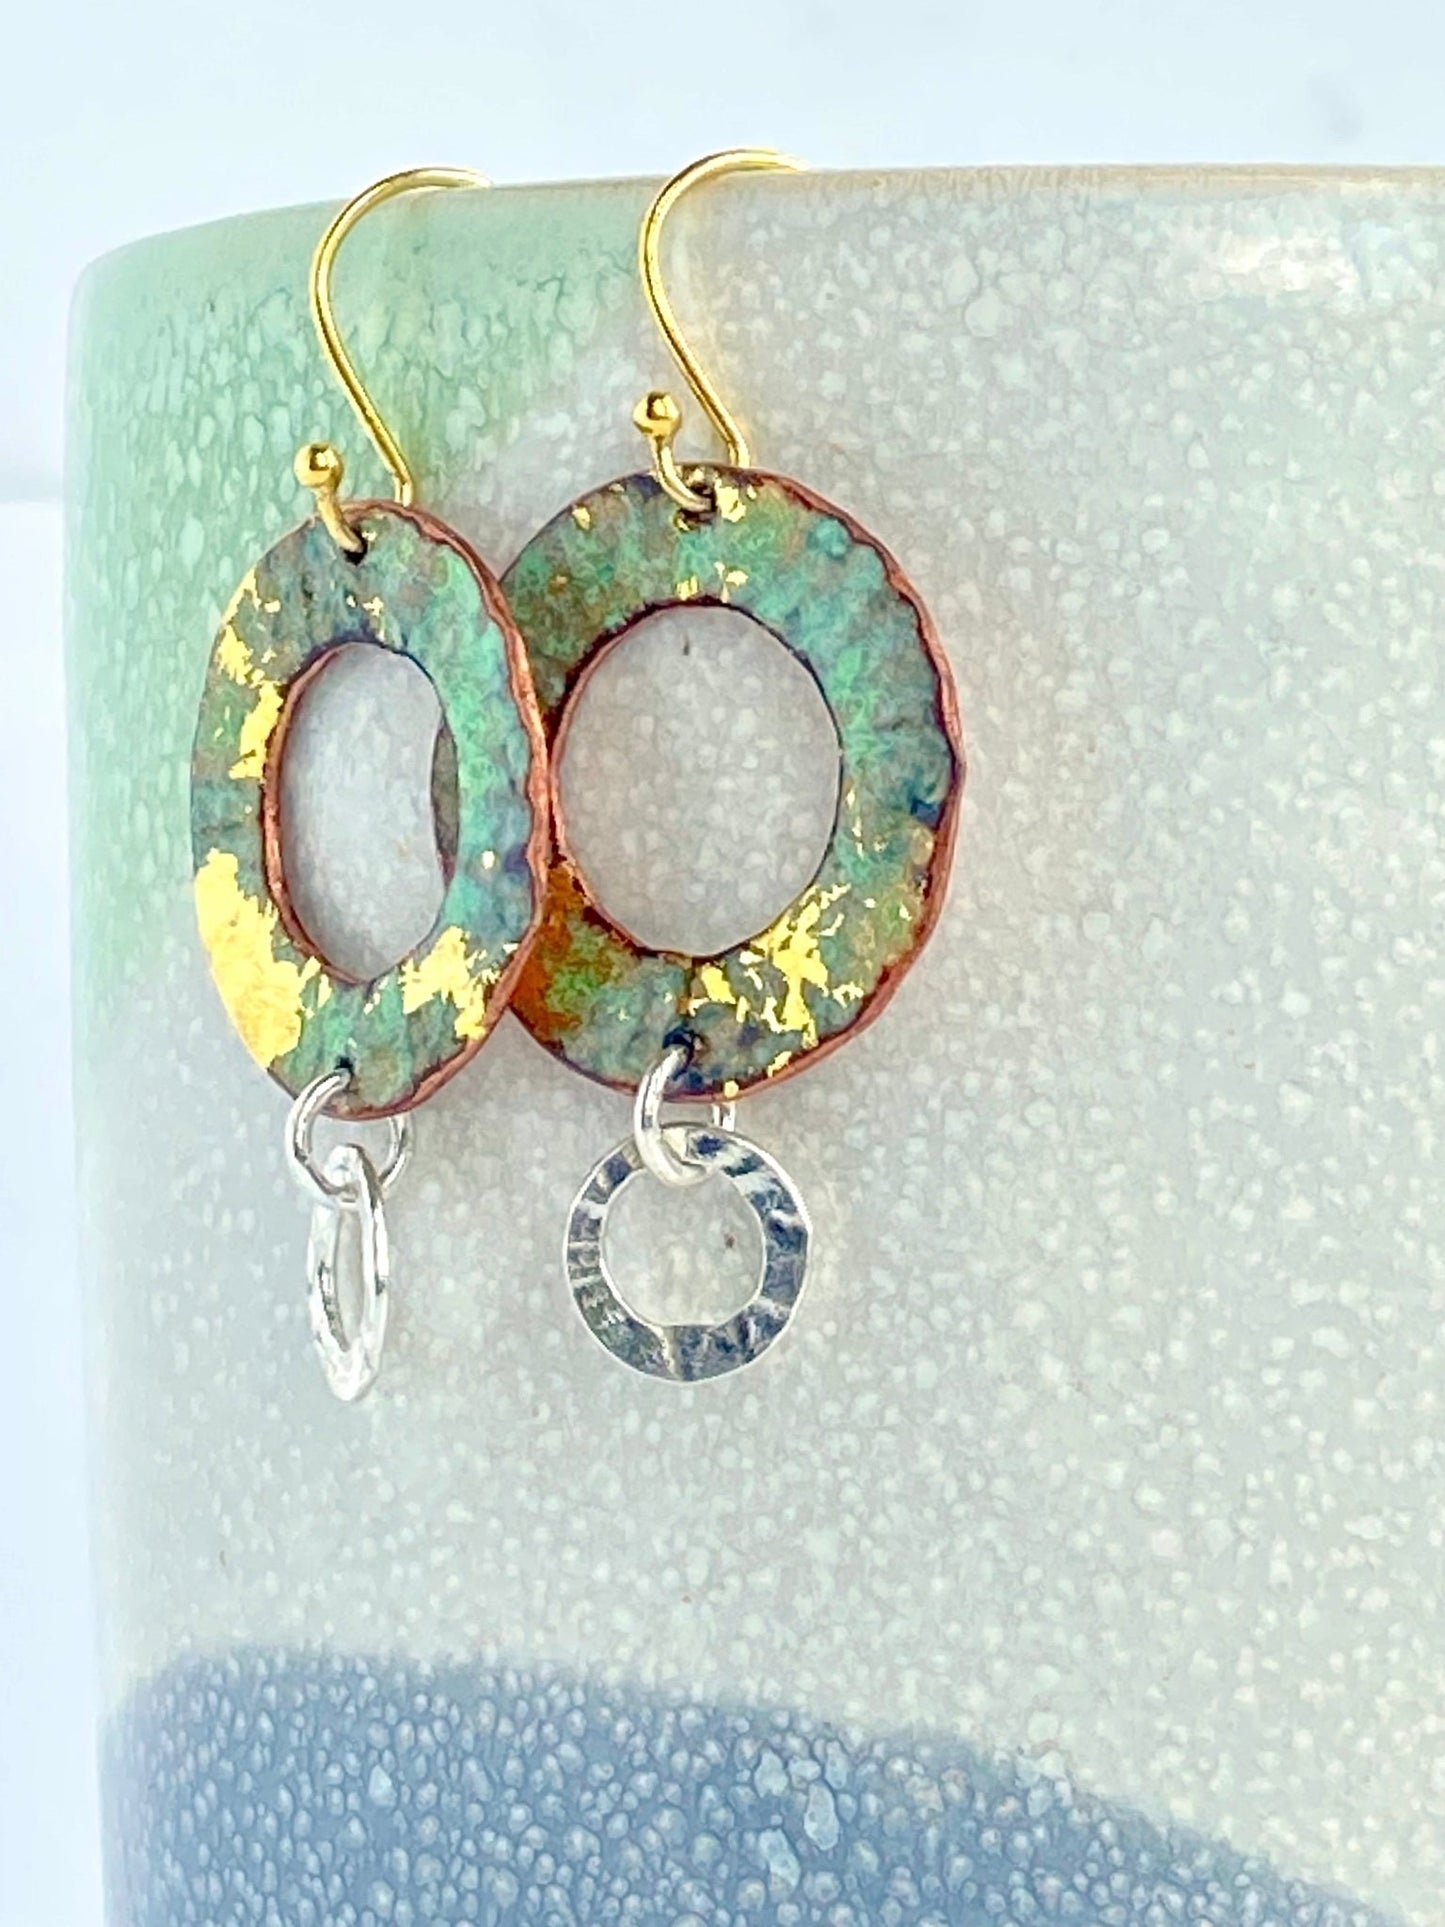 Ripple textured copper and green gold enamel earrings with silver textured hoop - Katie Johnston Jewellery